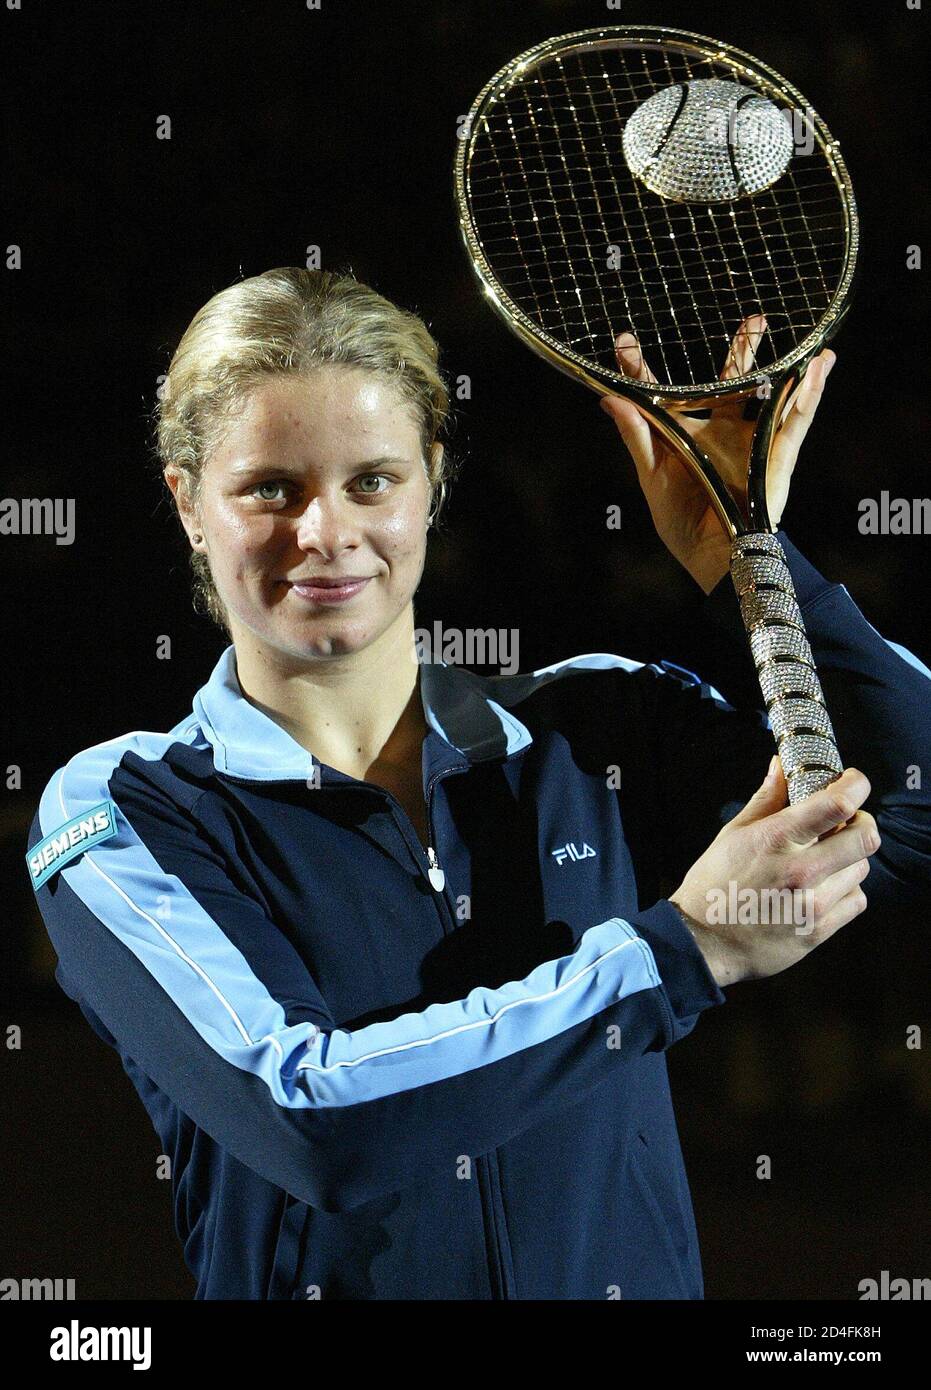 Belgium's Kim Klijsters holds up the Diamond racket trophy after defeating  Italy's Silvia Farina Elia in the final at the WTA Proximus Diamond Games  tournament in Antwerp February 22, 2004. Clijsters won